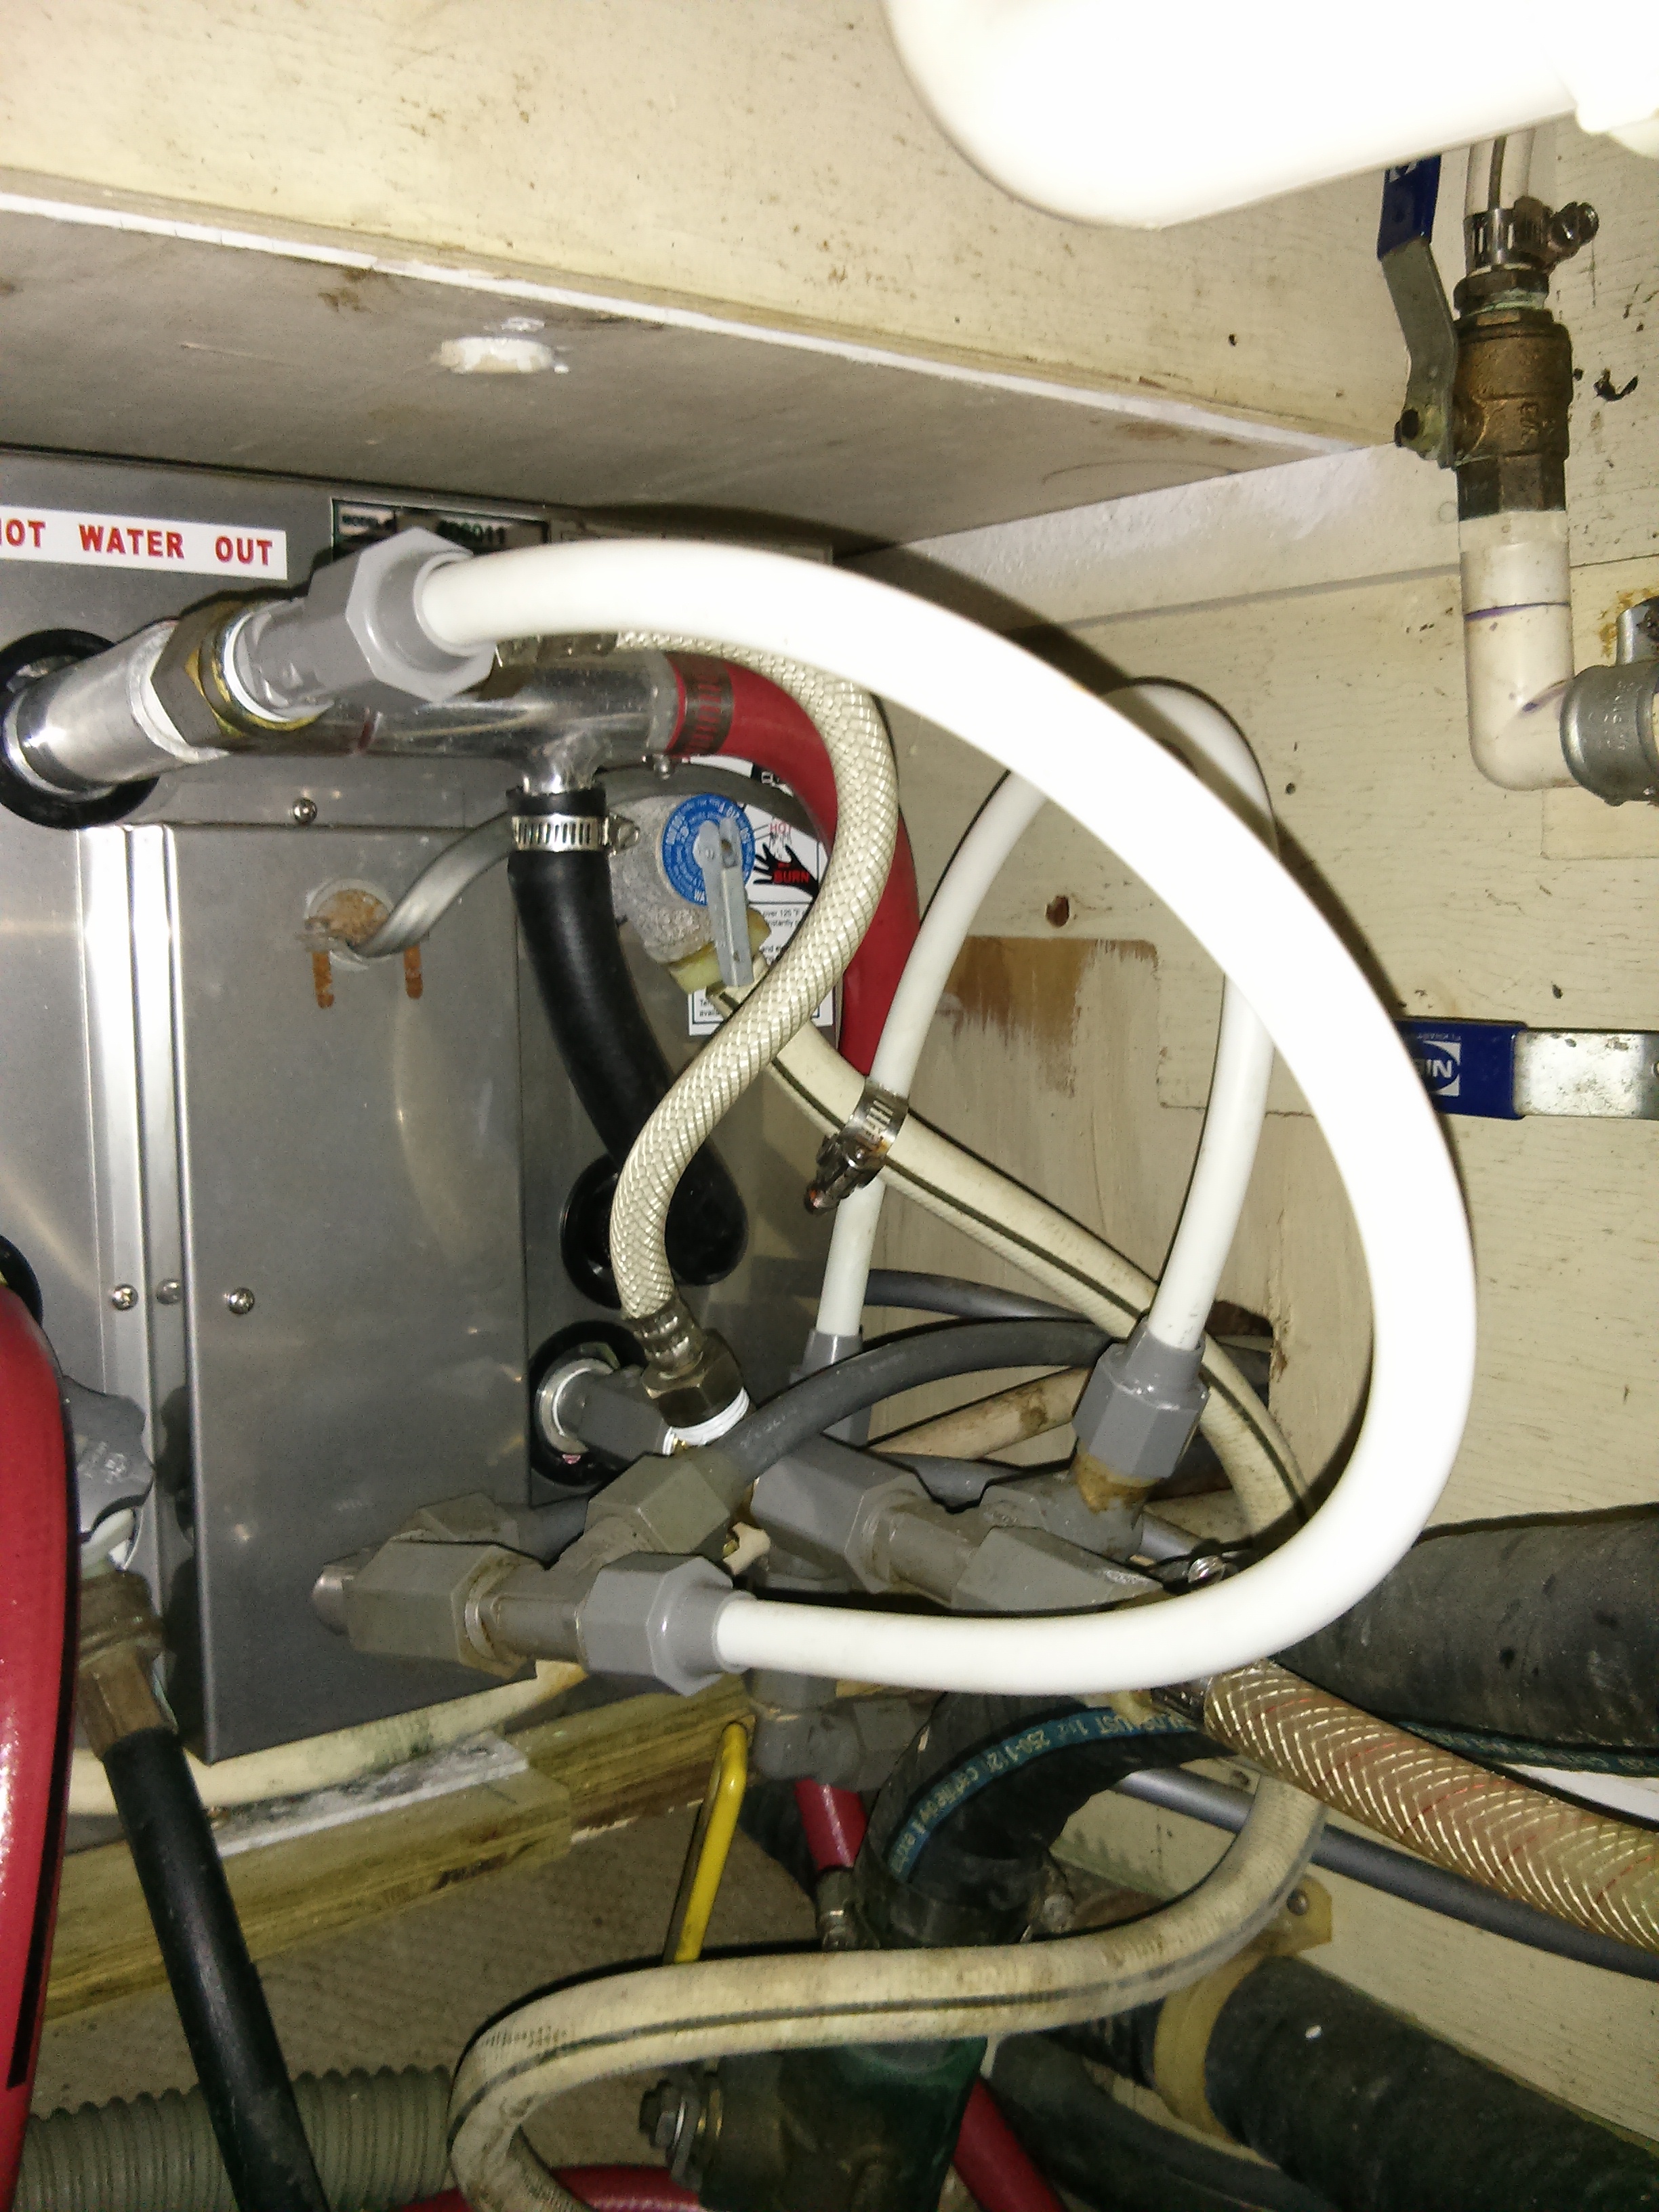 Plumbing chaos in the galley